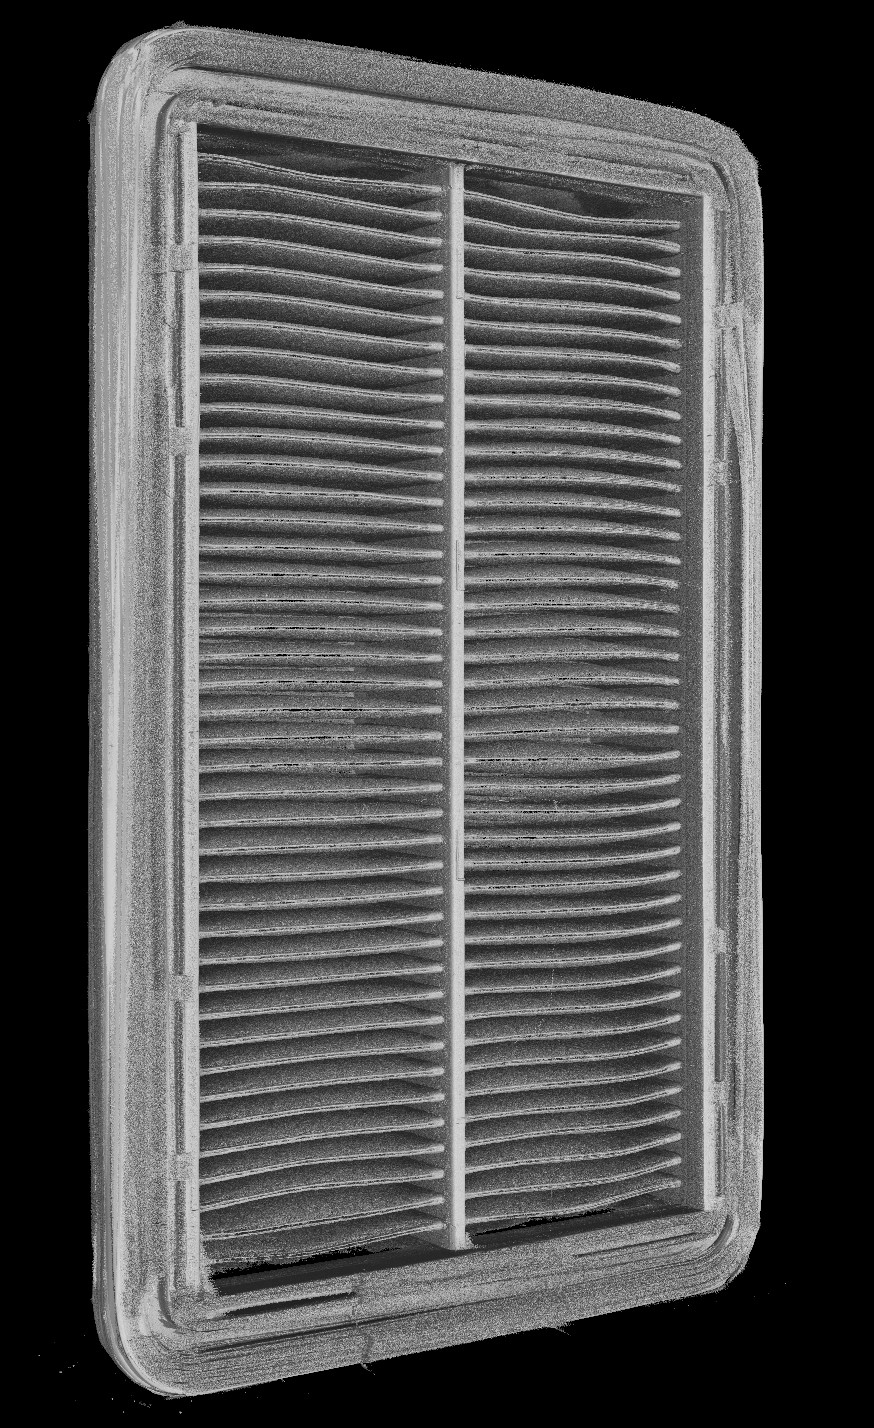 Scan of a used car engine air filter clogged up with impurities